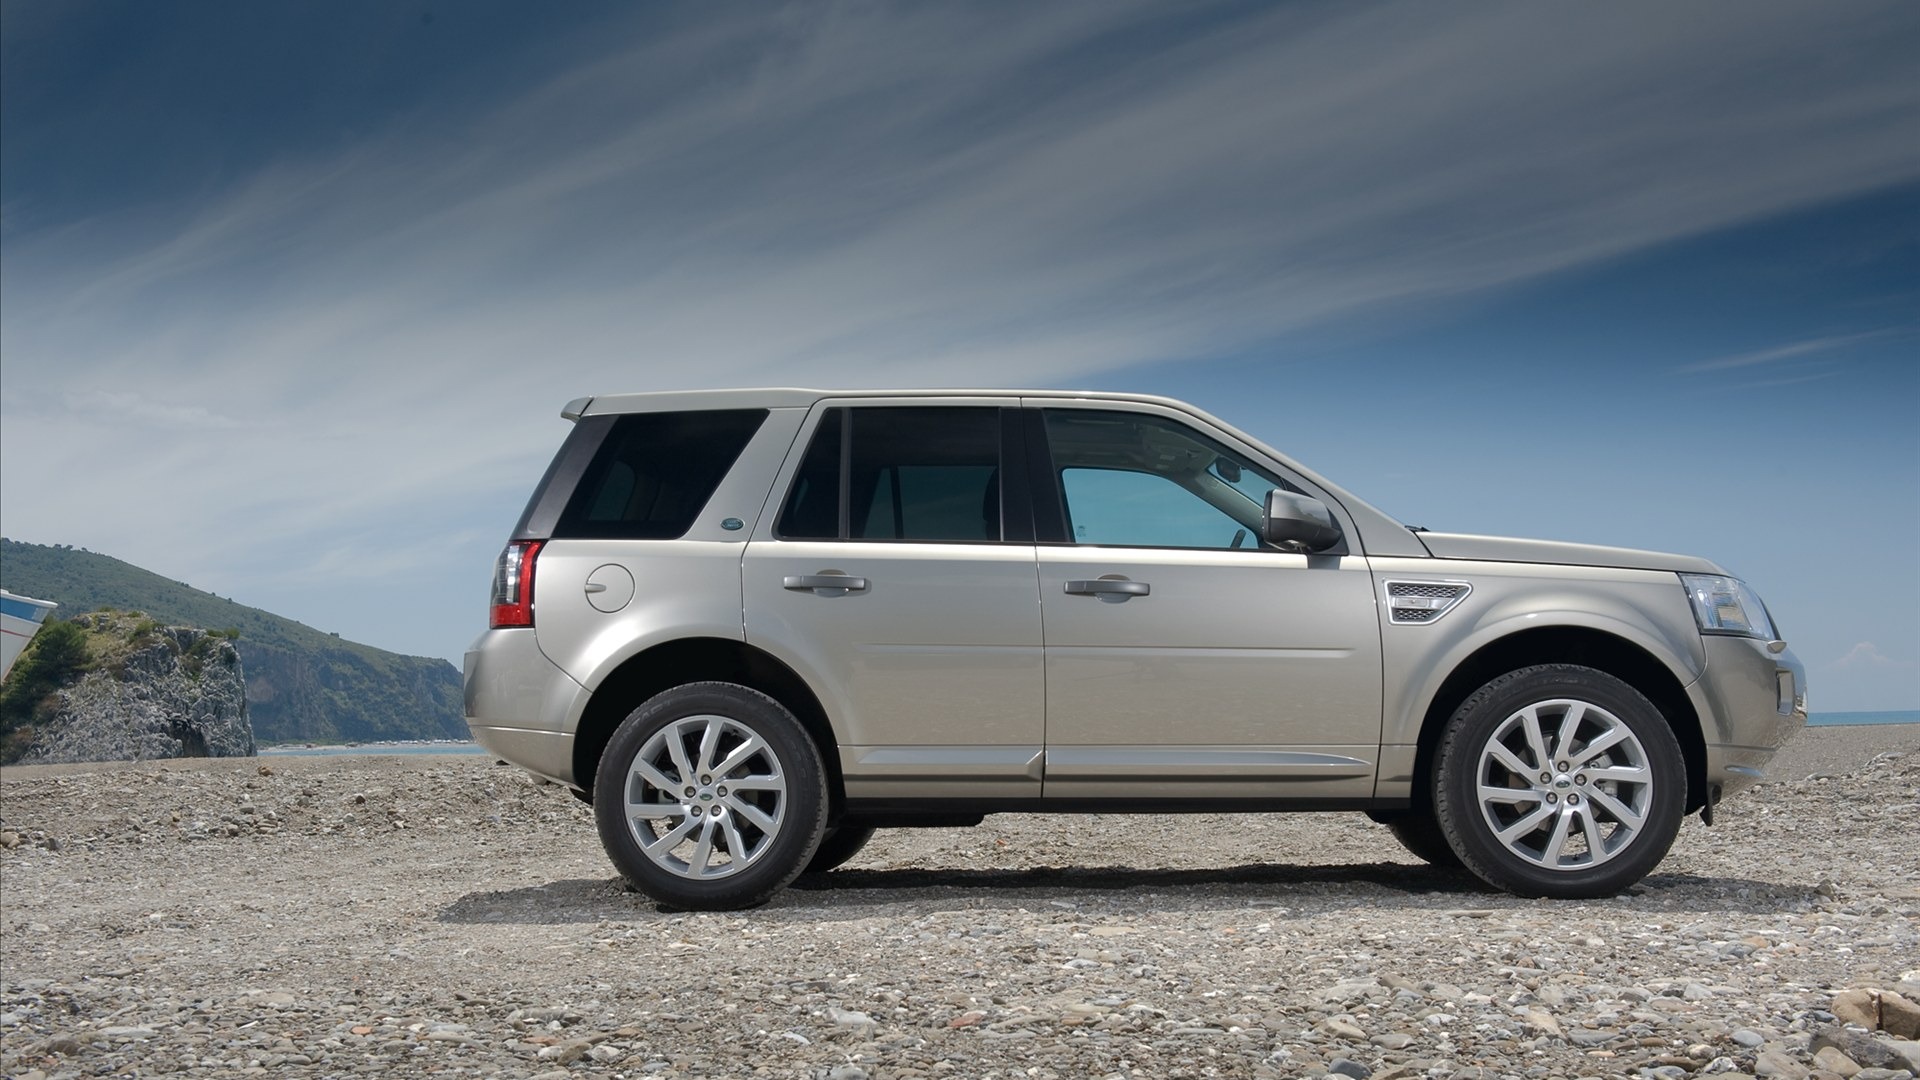 Land Rover wallpapers 2011 (1) #8 - 1920x1080